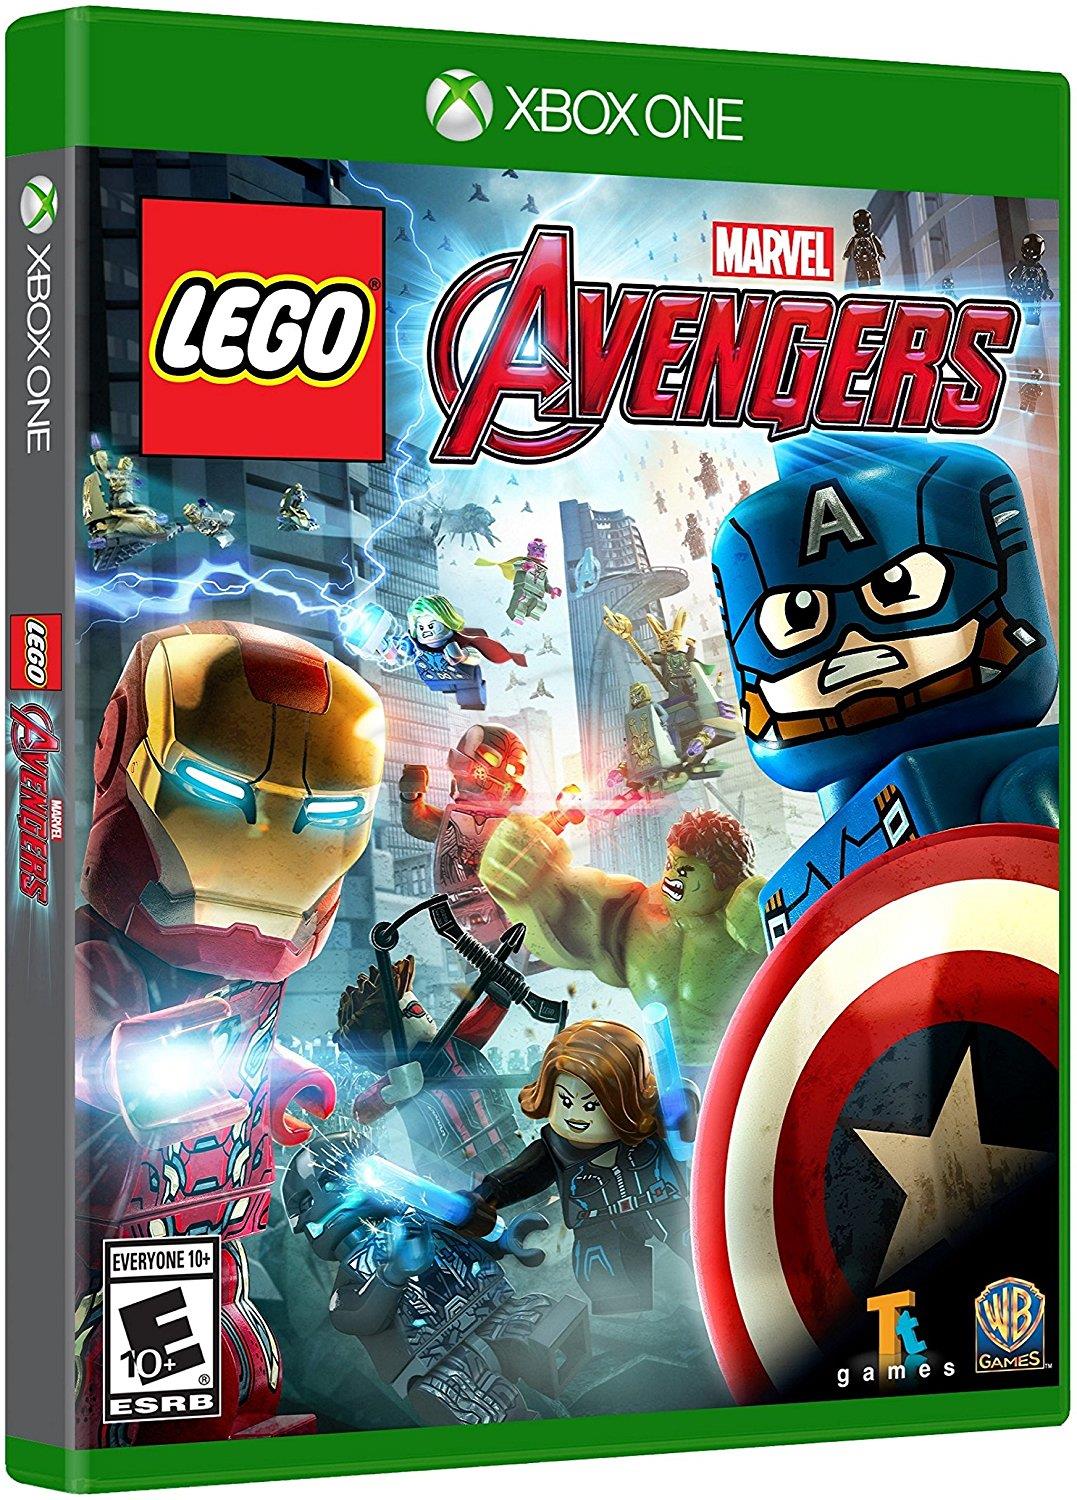 Xbox One LEGO MARVEL AVENGERS (digital version; ENG; from 7 years old)